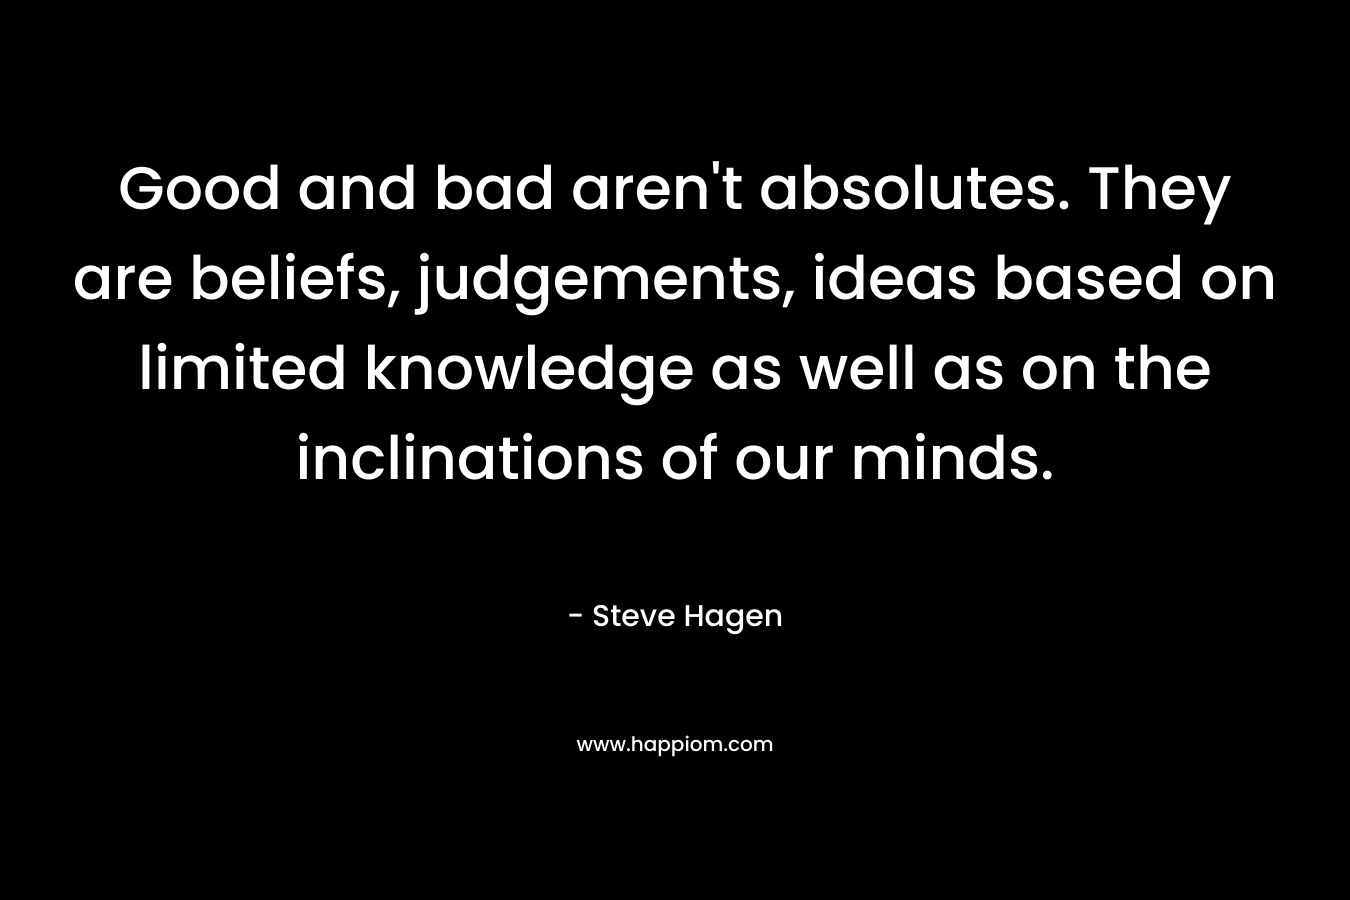 Good and bad aren’t absolutes. They are beliefs, judgements, ideas based on limited knowledge as well as on the inclinations of our minds. – Steve Hagen